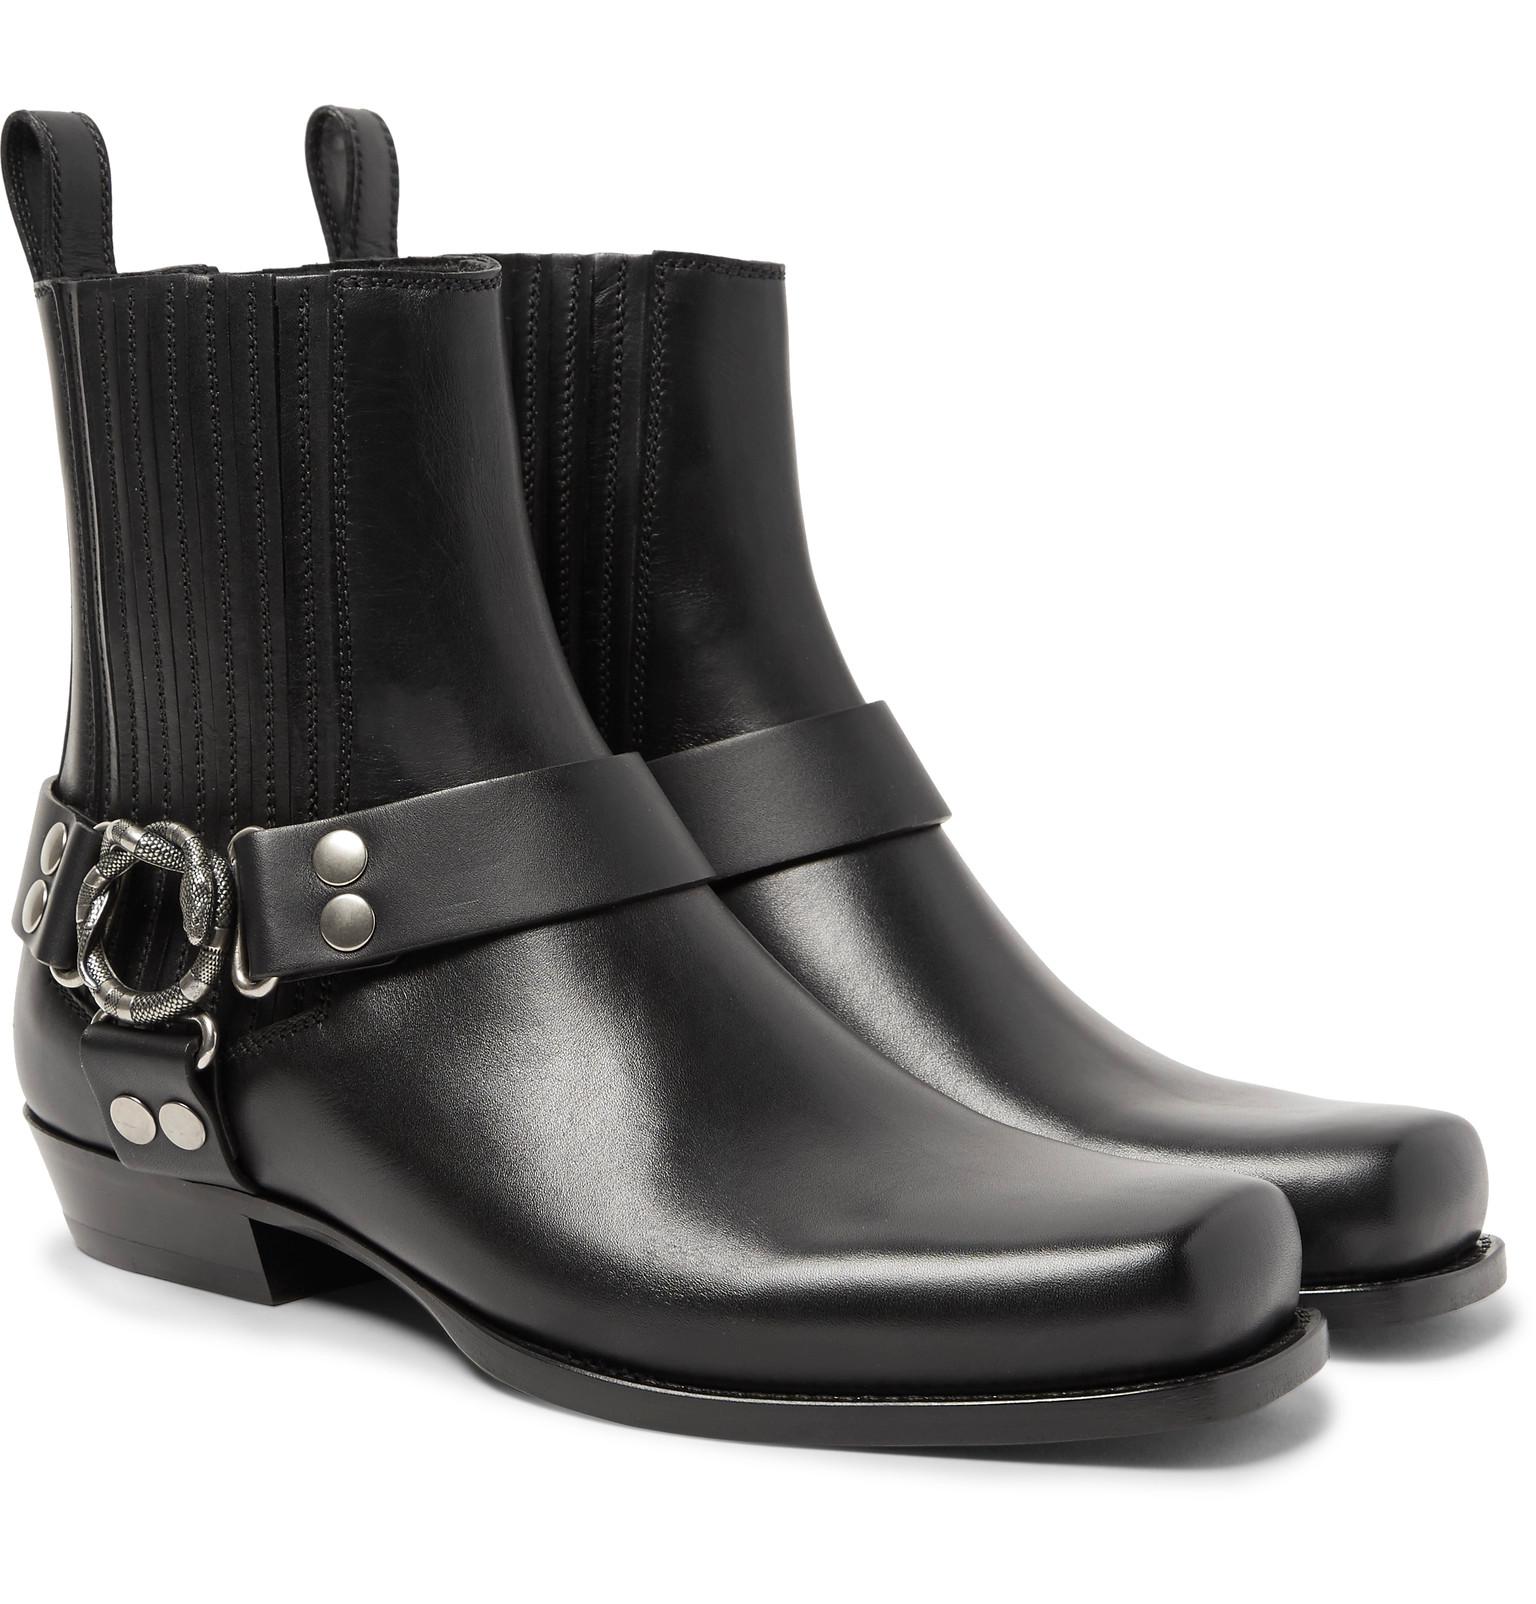 Gucci Embellished Leather Harness Boots in Black for Men - Lyst